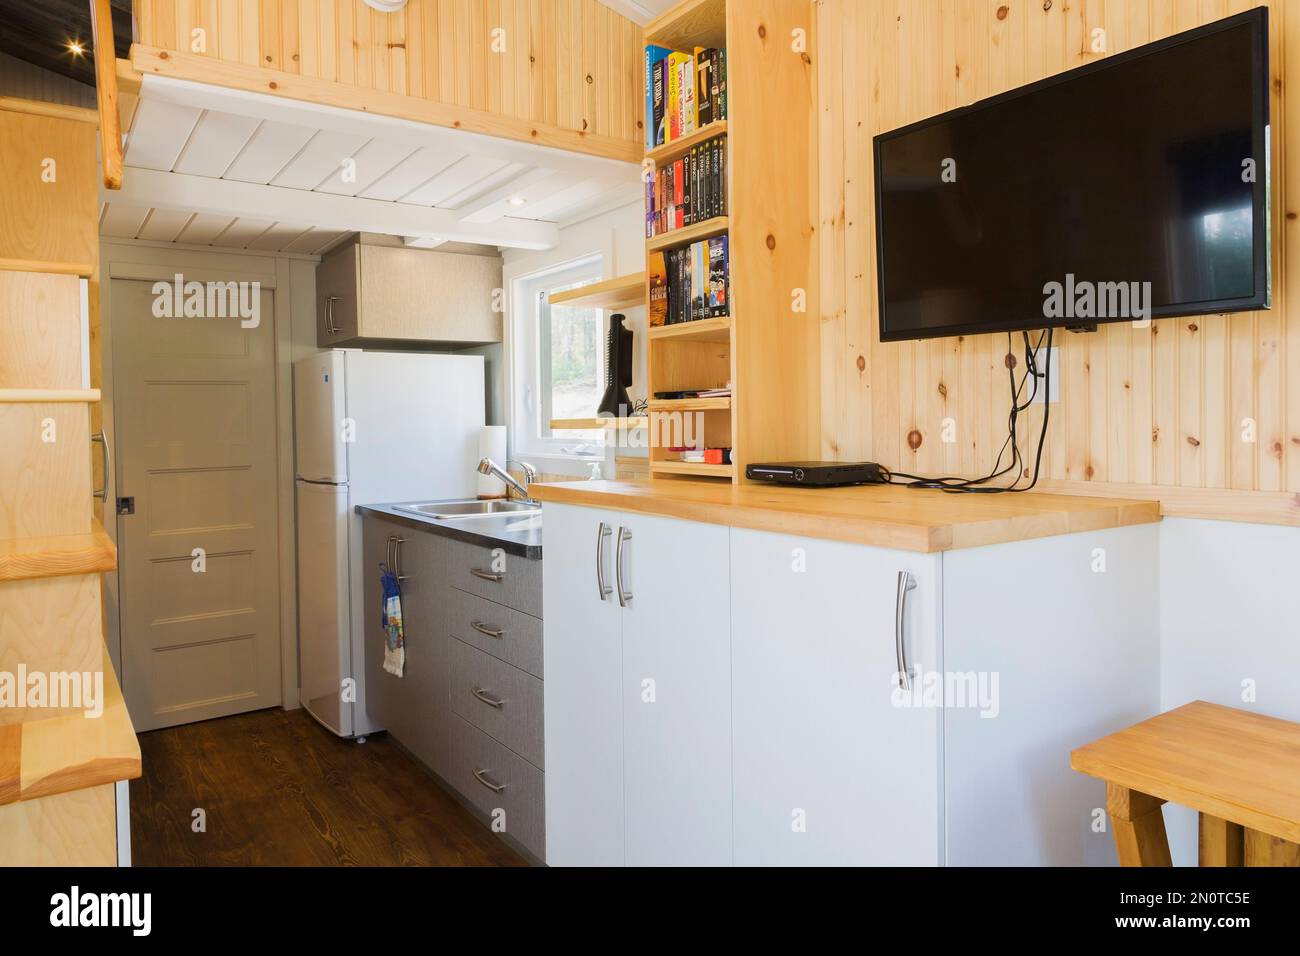 Partial view of pinewood stairs leading to upper floor bedroom, kitchen area and bathroom door in background inside 8 x 24 foot mobile mini house. Stock Photo